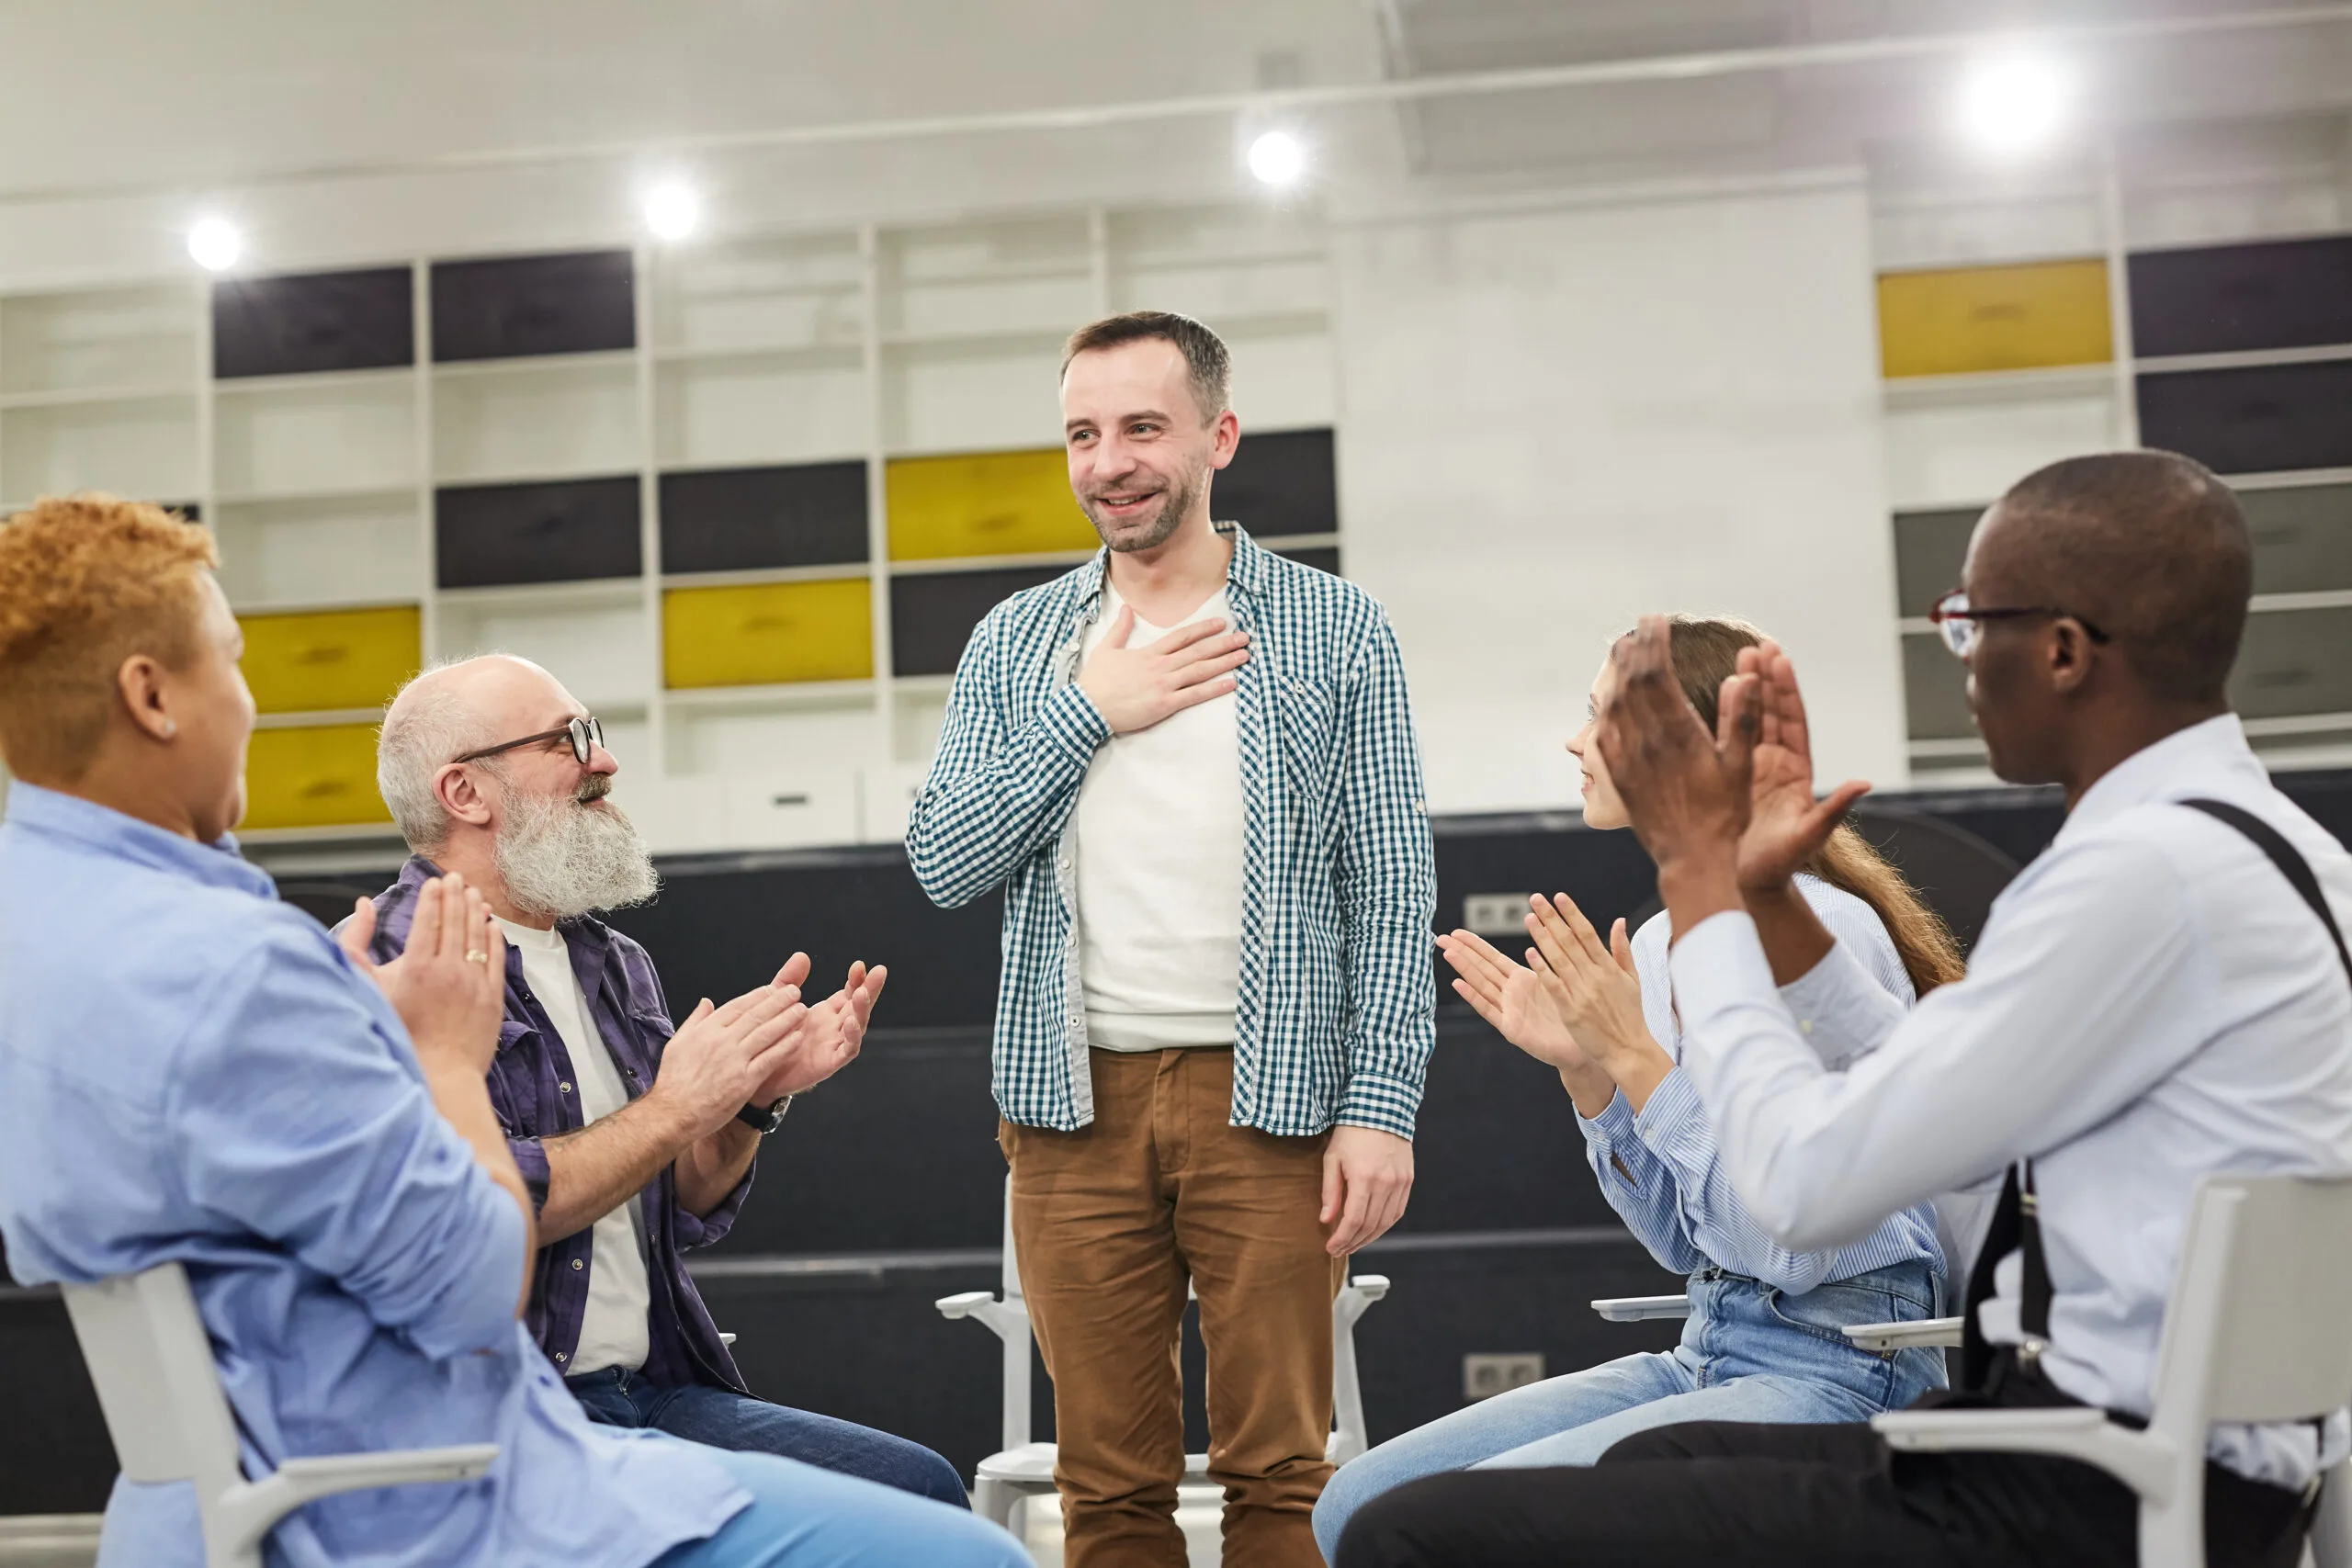 Portrait of smiling mature man    introducing himself during therapy session in support group to people clapping, copy space